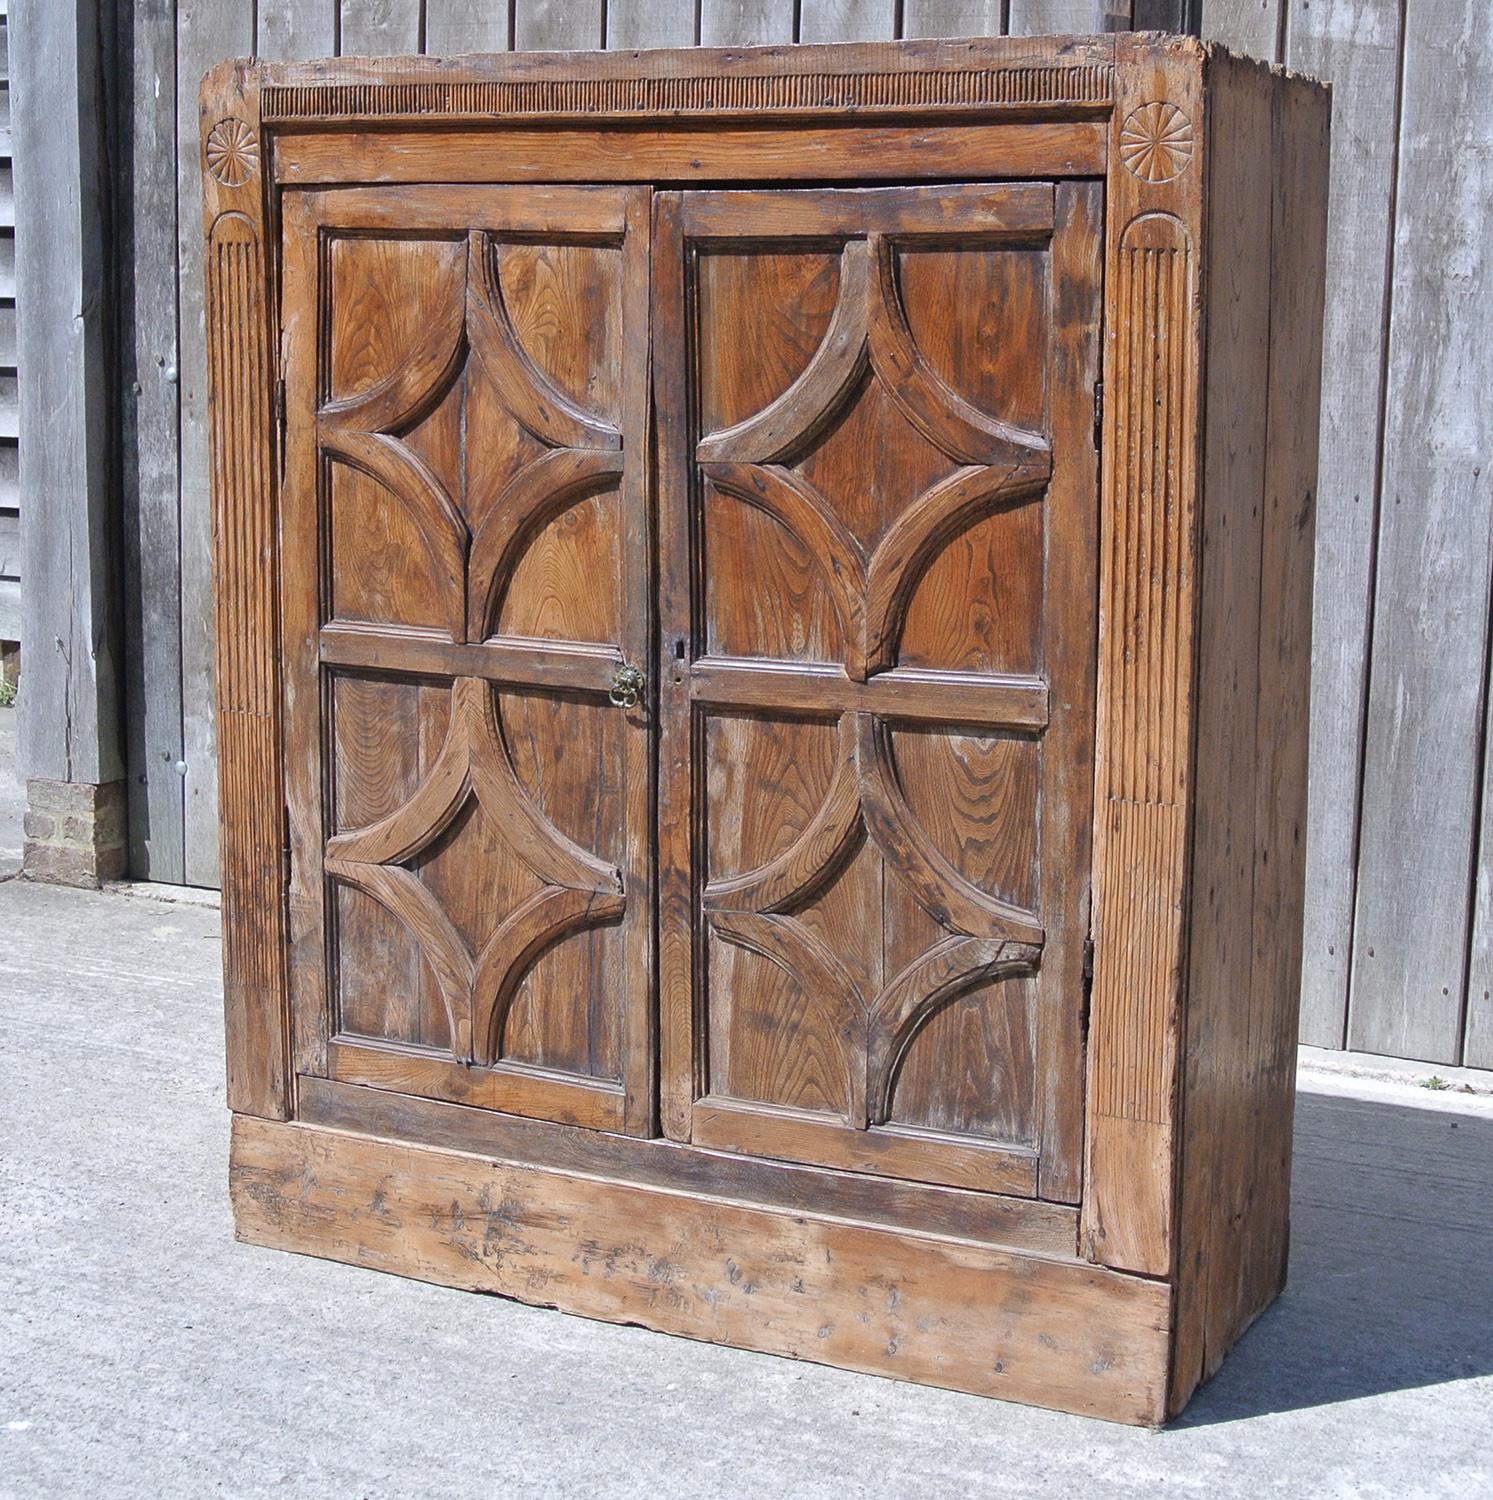 A most unusual and characterful solid elm cupboard, a primitive cottage piece made in around 1750 and probably Irish.

With substantial fielded panel and framed doors with applied Elm mouldings which create a lozenge shape to each panel. The flanks